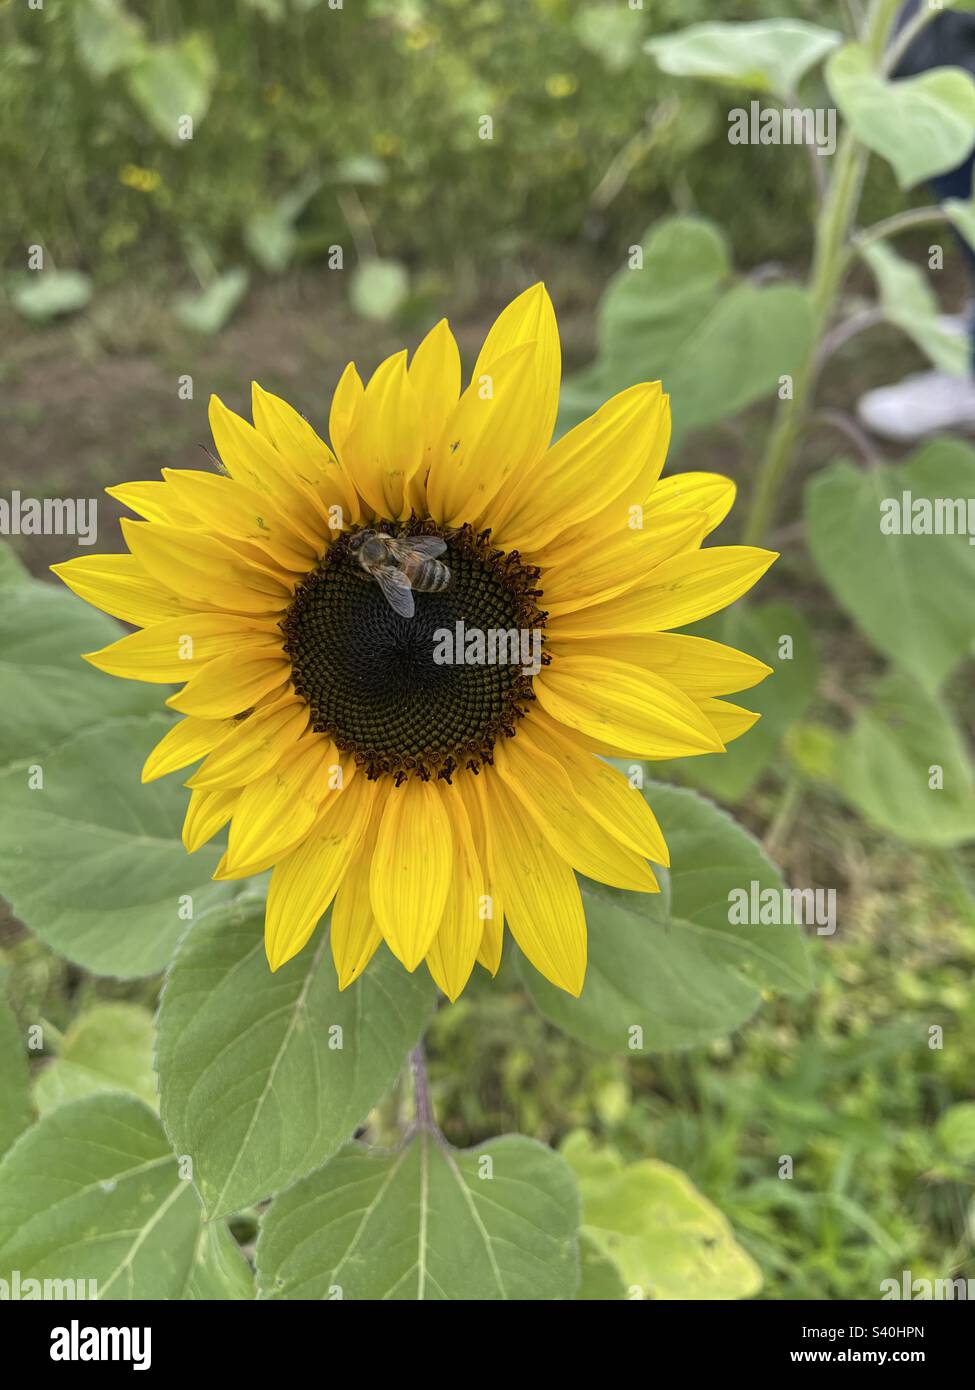 Sunflower with a bee Stock Photo